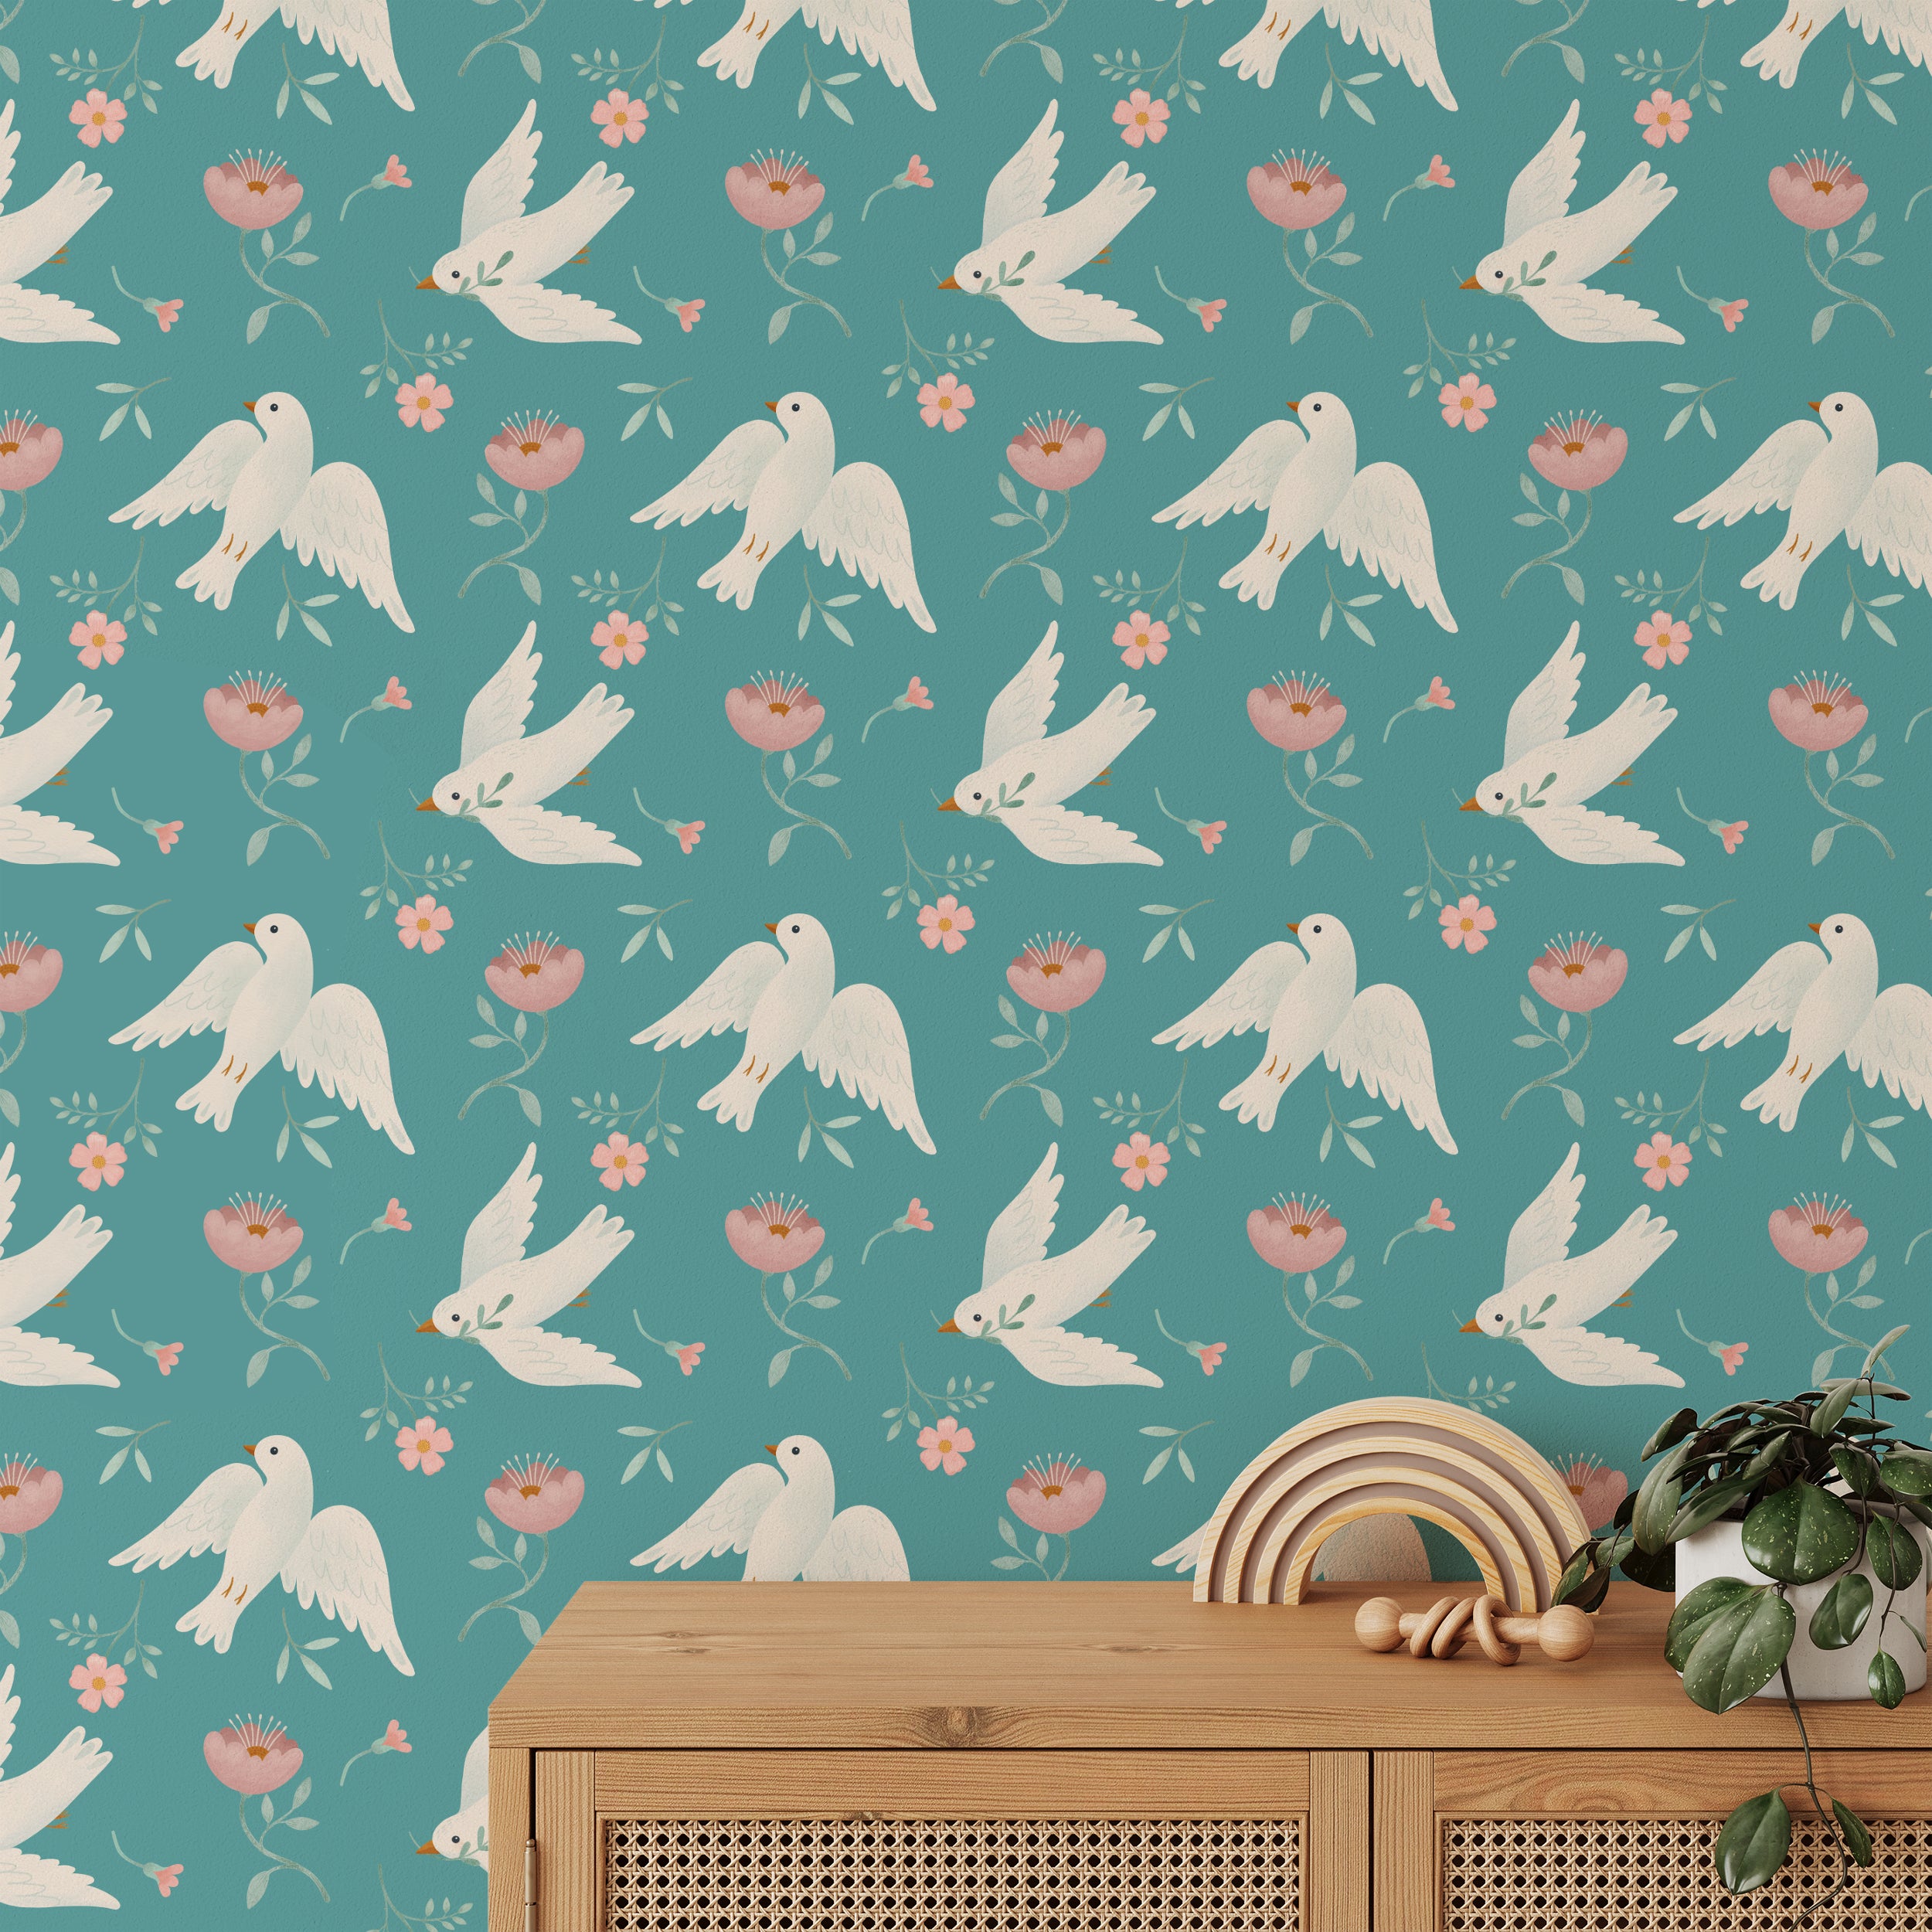 Interior design featuring Singing Birds Wallpaper, showing white doves and pink flowers pattern against a teal backdrop, complementing a minimalist room with a wooden toy on a white cabinet.